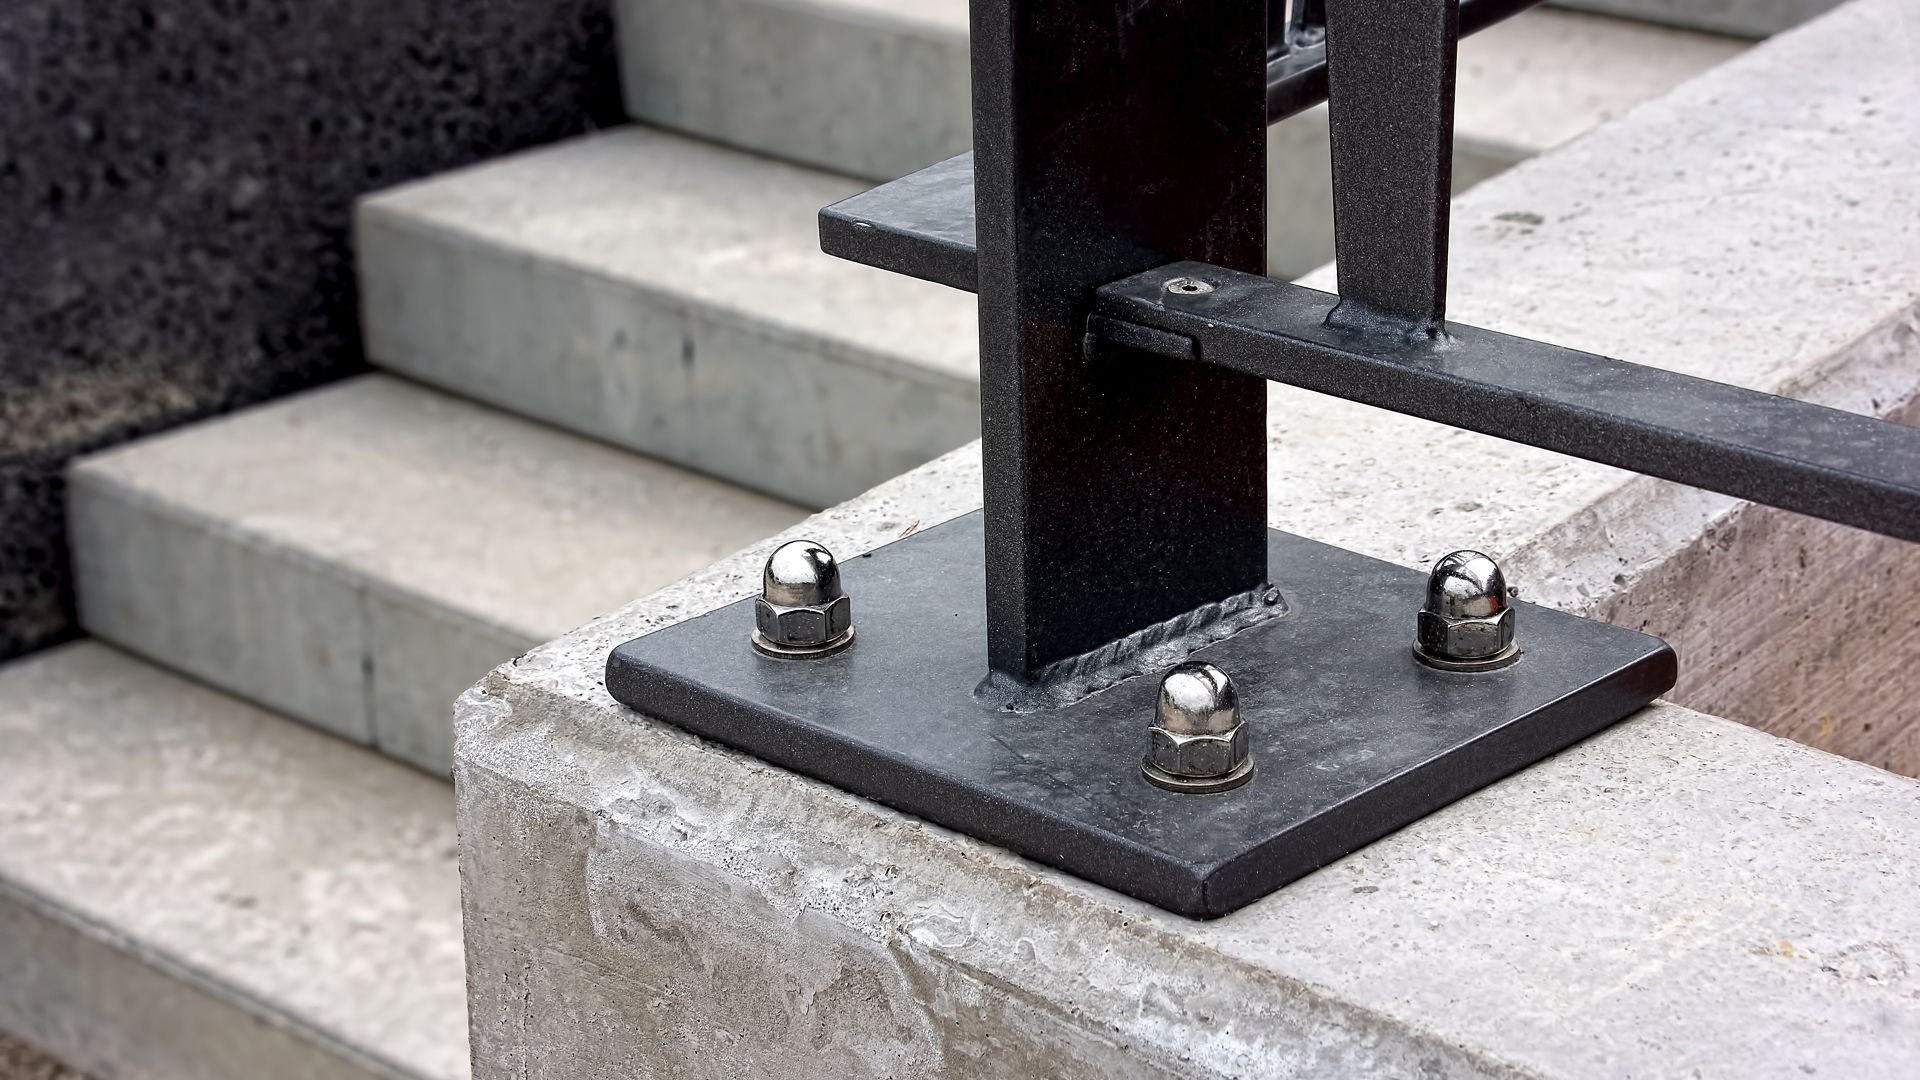 Bolts anchored into concrete with Sika AnchorFix anchoring adhesive